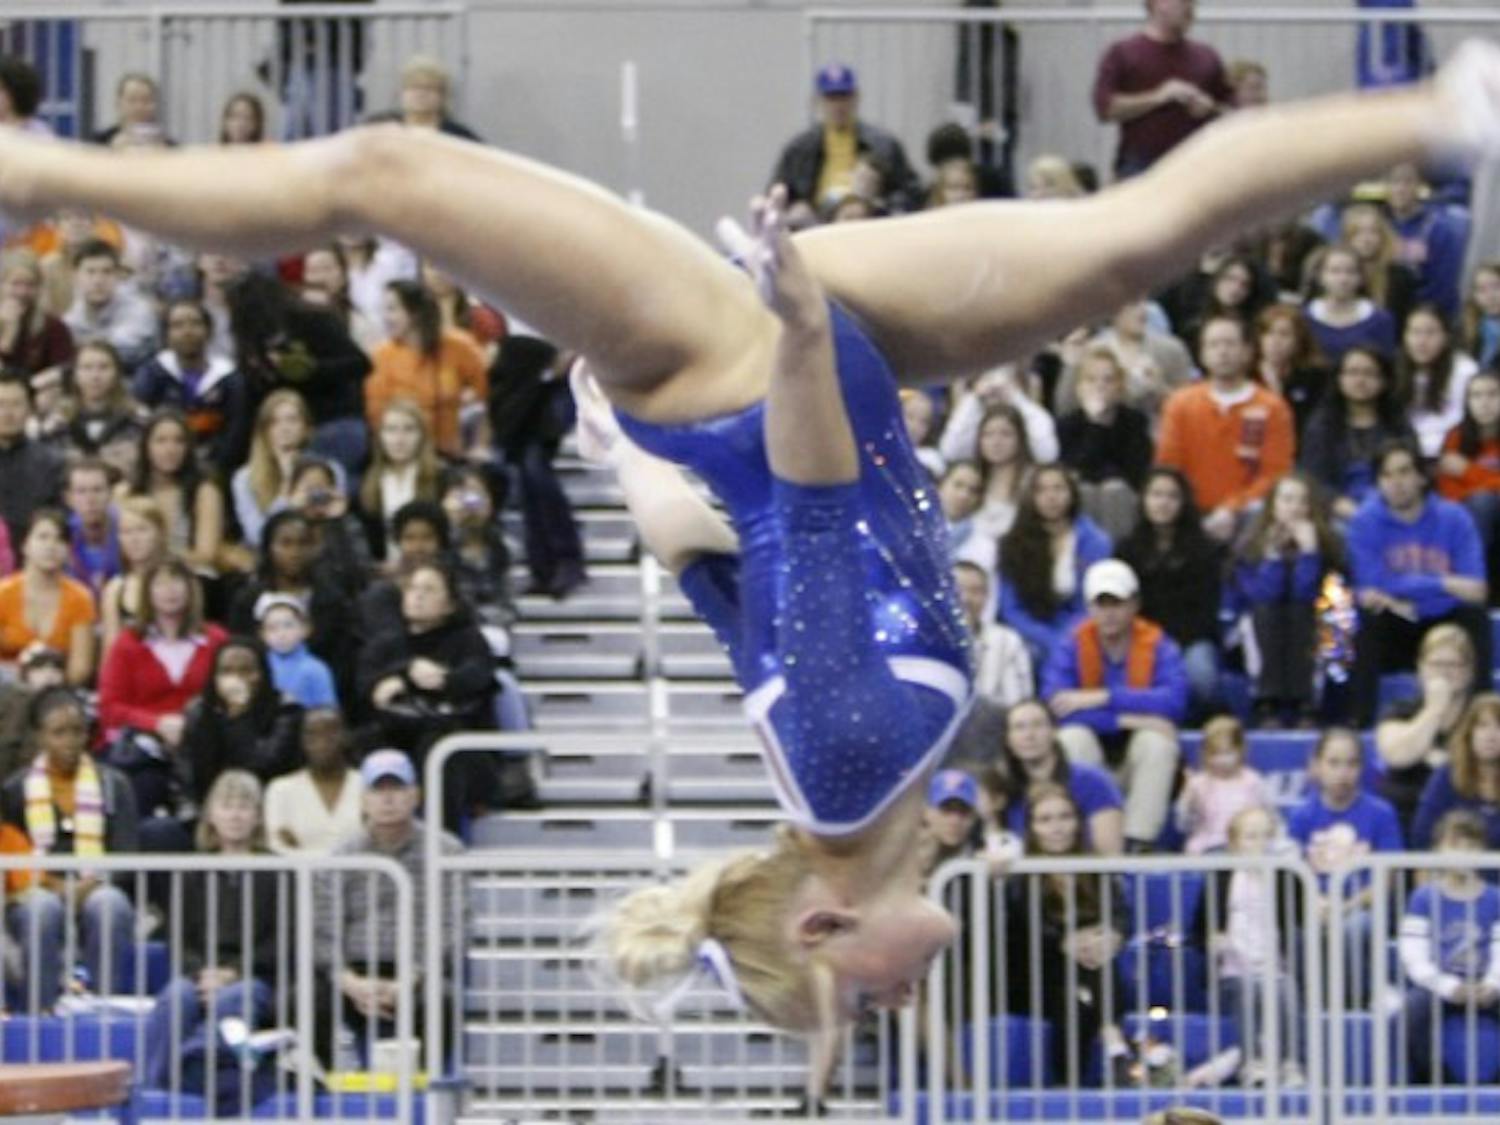 Gators freshman gymnast Rachel Spicer skipped her final semester of high school to enroll in UF at age 17. She posted career bests on beam (9.875) and vault (9.85) Friday against Auburn.